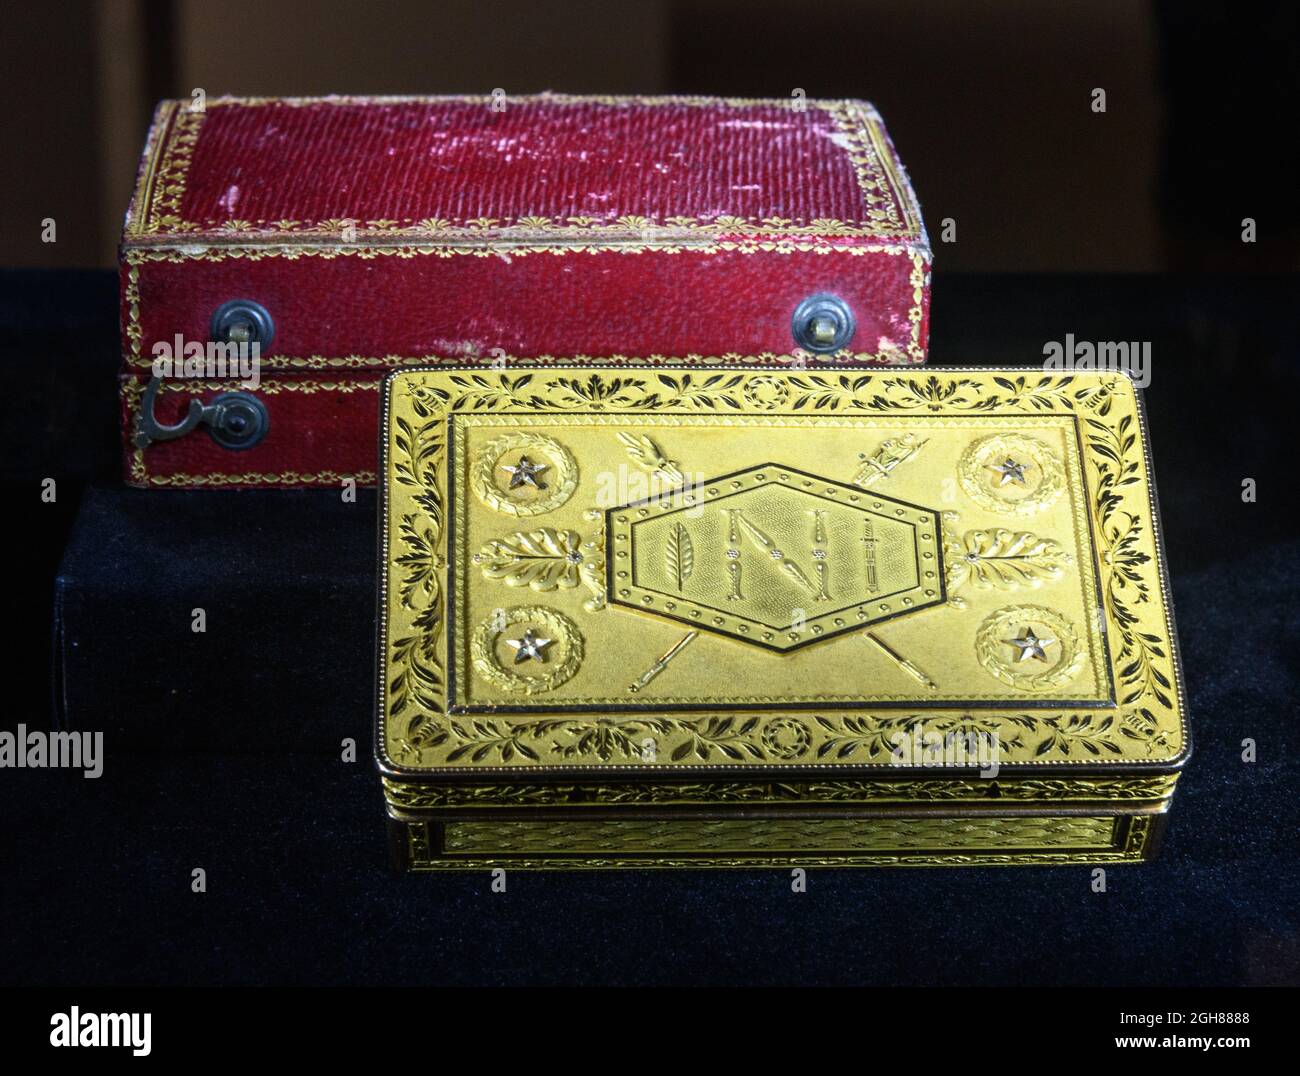 Hong Kong, China. 06th Sep, 2021. HONG KONG, HONG KONG SAR, CHINA: SEPTEMBER 2021. The newly discovered Napoleon Bonaparte hat comes to Hong Kong ahead of BonhamsÕ Napoleon Bonaparte: The British Sale in London. A French Gold snuffbox with the cipher of Napoleon I, offered as part of the sale.Alamy Live news/Jayne Russell Credit: Jayne Russell/Alamy Live News Stock Photo